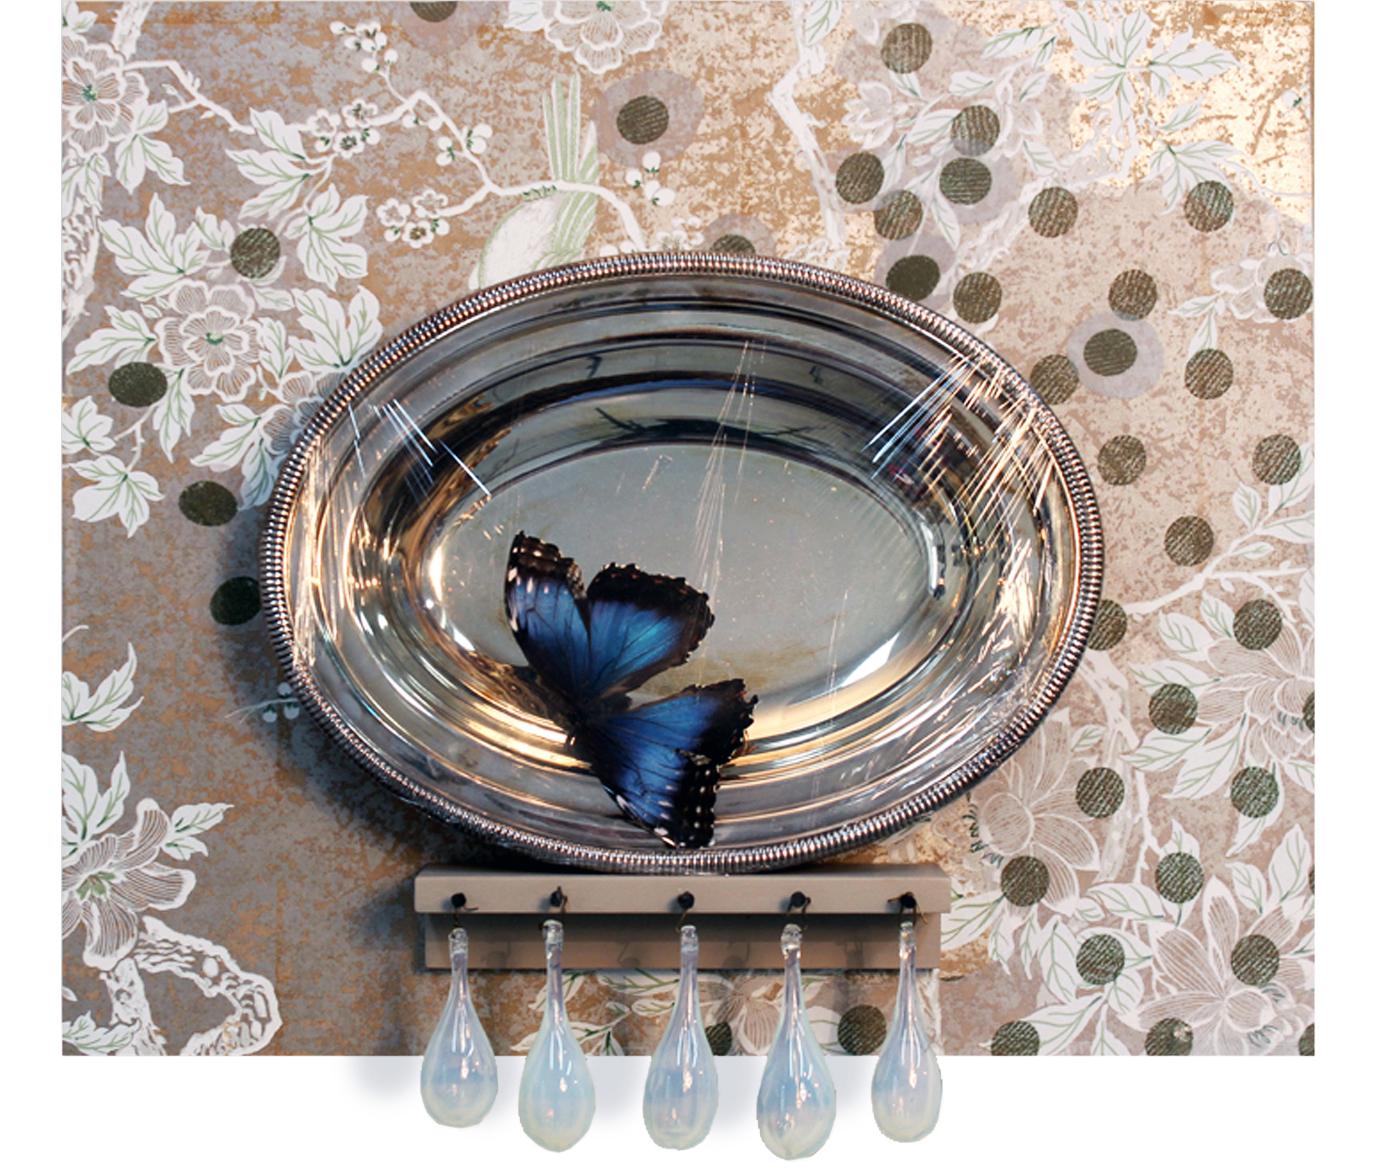 "Parlour", wallpaper, glass, silver platter, butterfly, nails, mounted on board